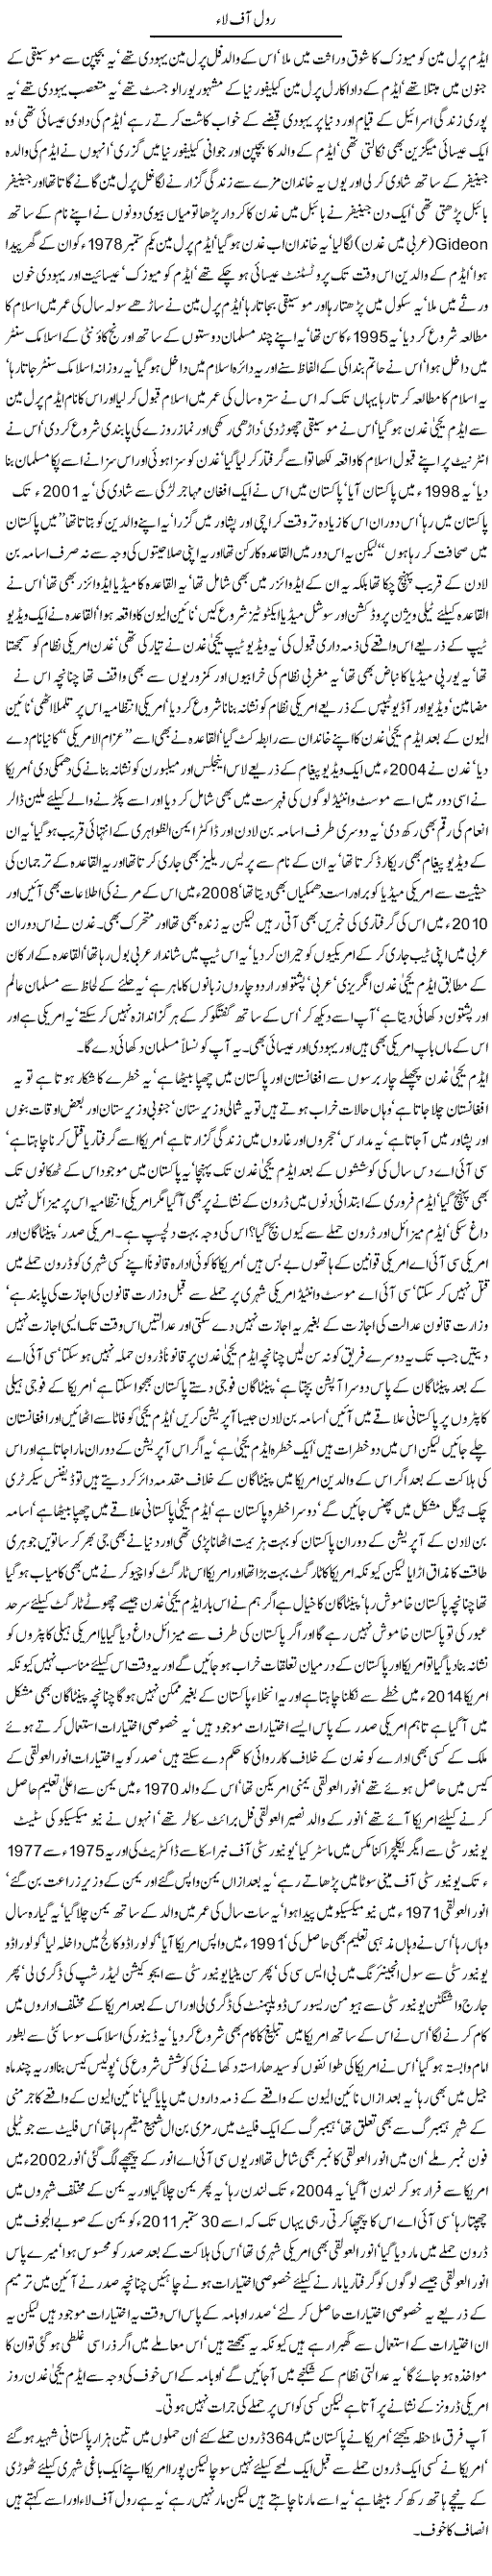 Rule of Law - Javed Chaudhry